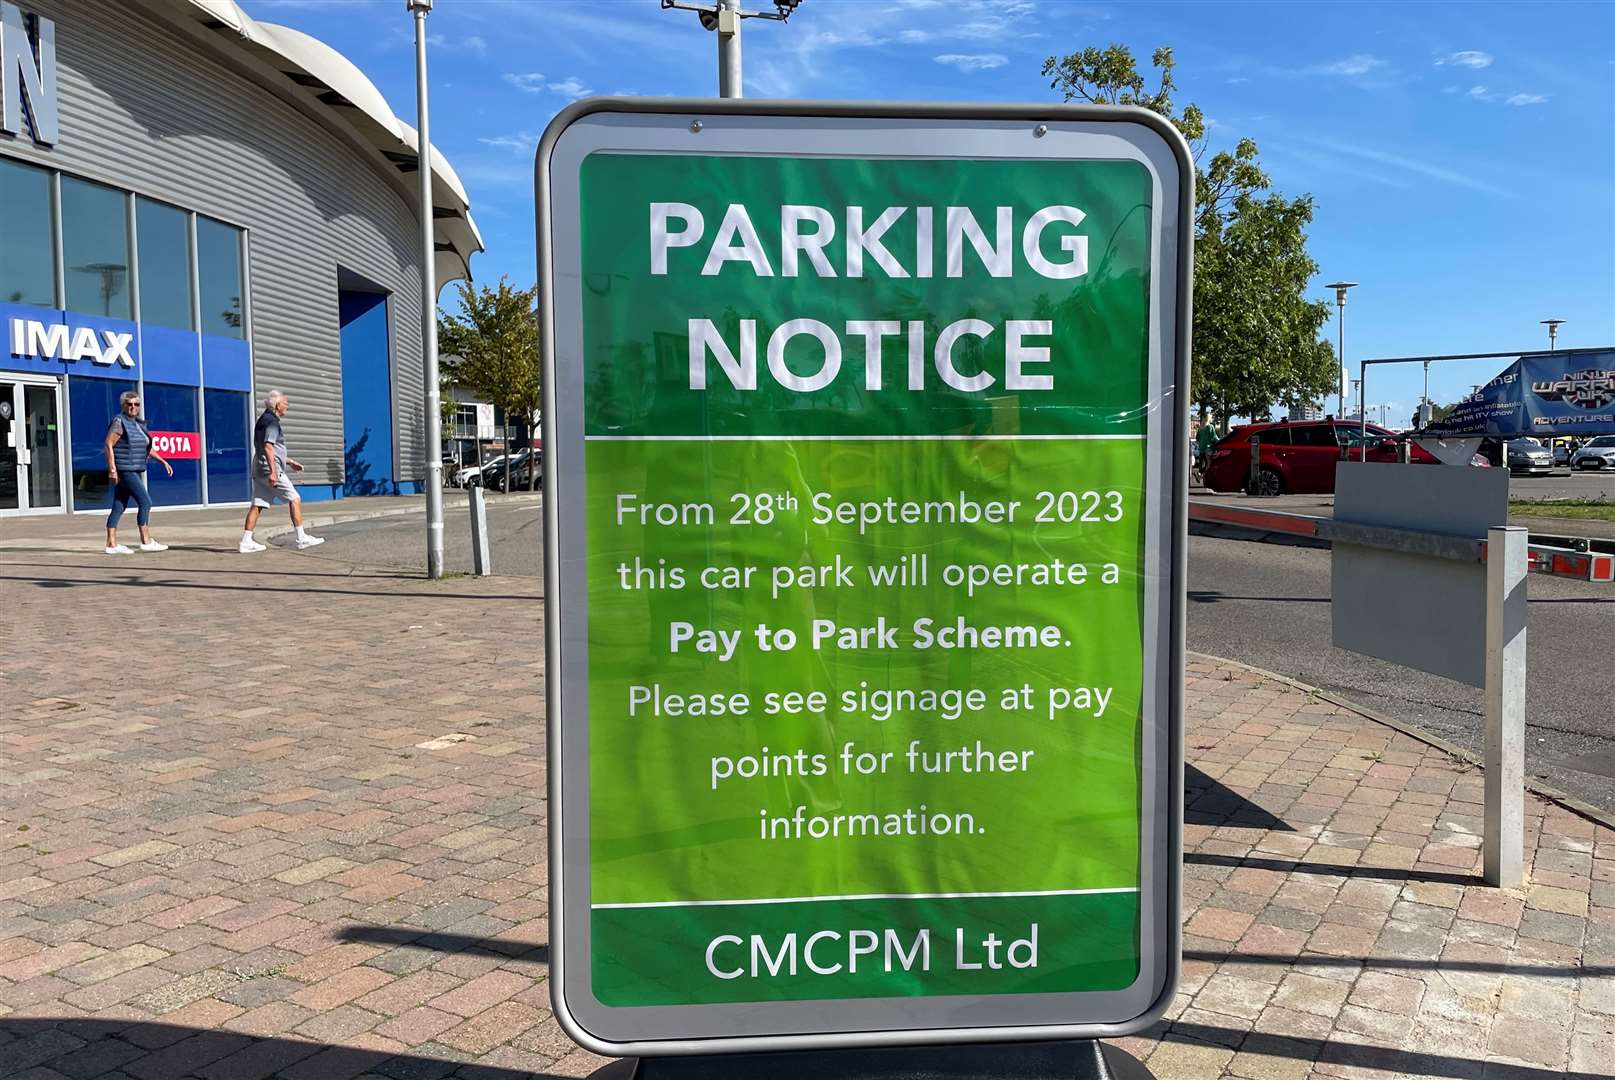 Delays in new parking charge system at Dockside Outlet Centre